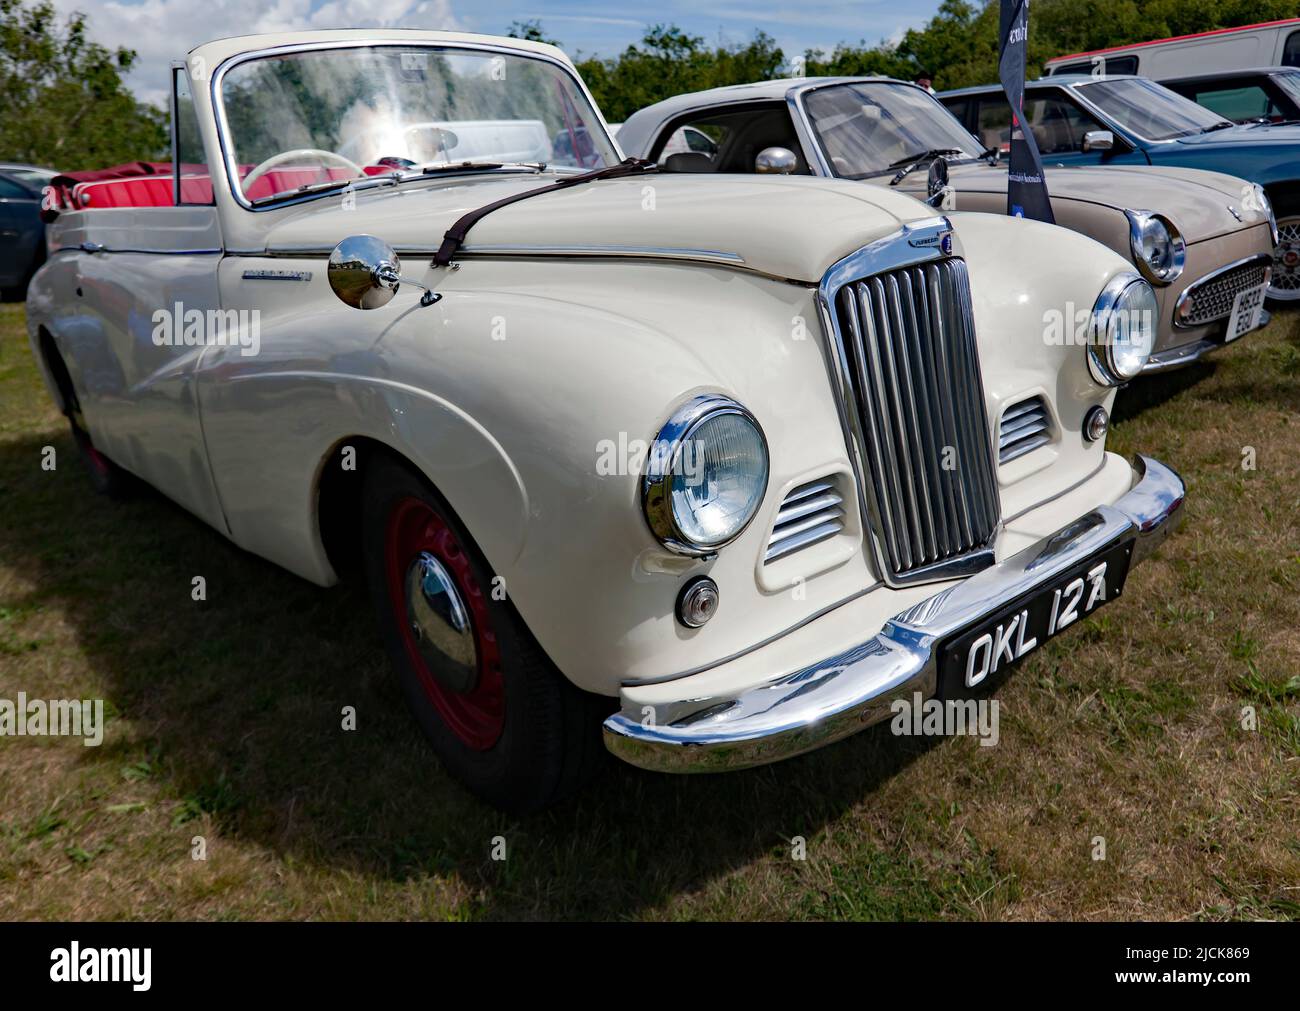 Three-quarters front view of a MkII,  Cream, 1951, Sunbeam Talbot 90, drophead coupé, on display at the Deal Classic Car Show 2022 Stock Photo